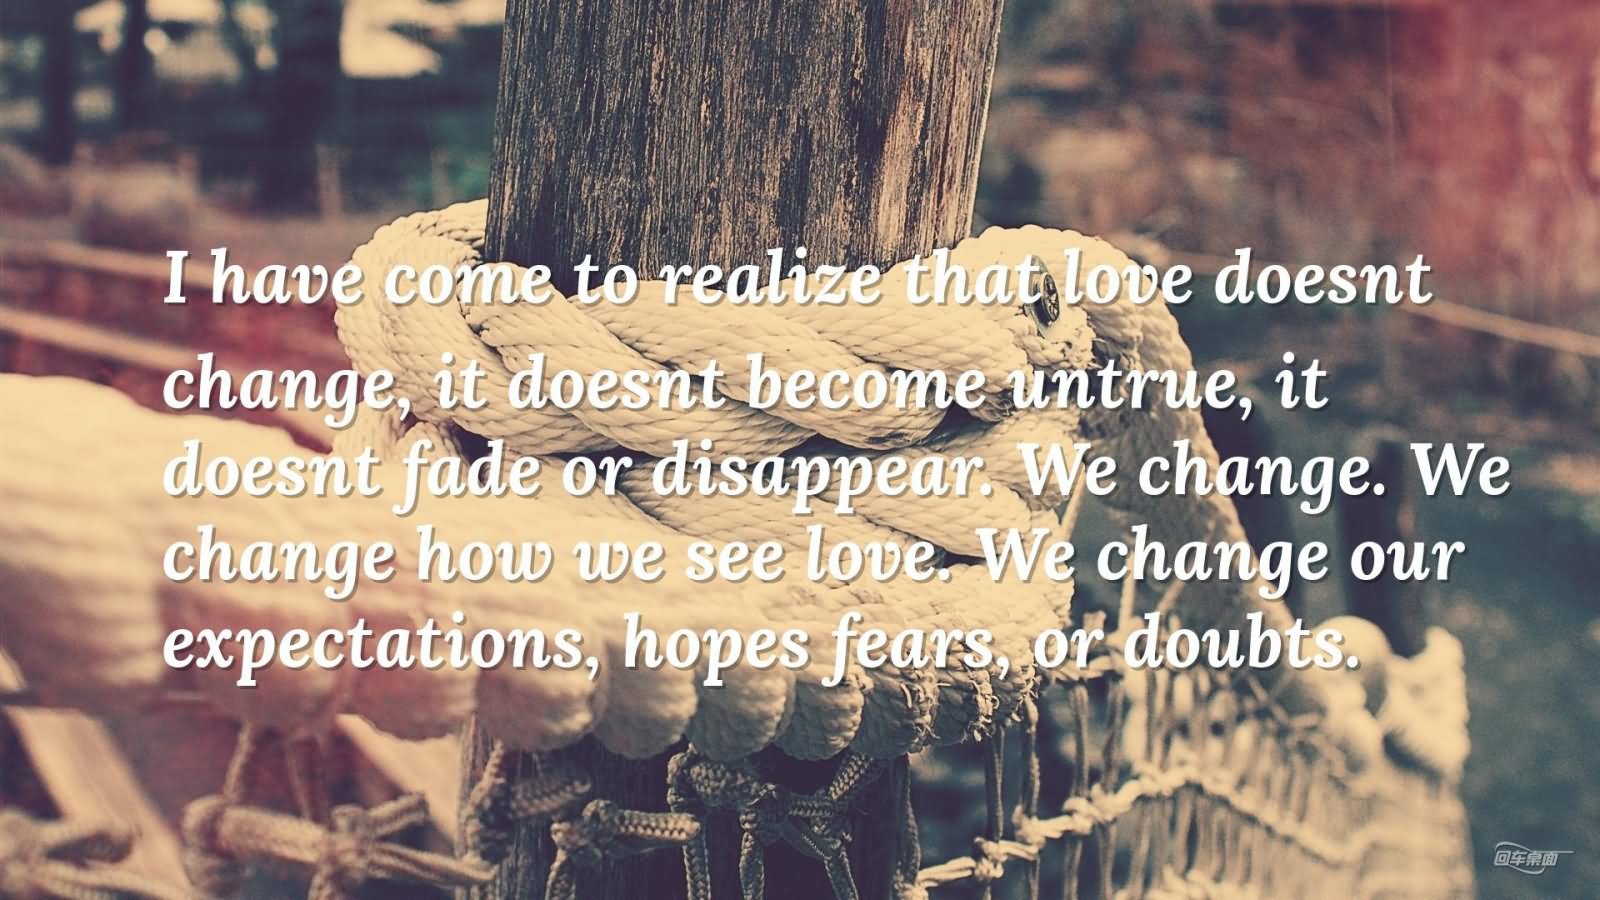 I have come to realize that love doesn't change, it doesn't become untrue, it doesn't fade or disappear. We change. We change how we see love. We change our expectations, hopes fears, or doubts